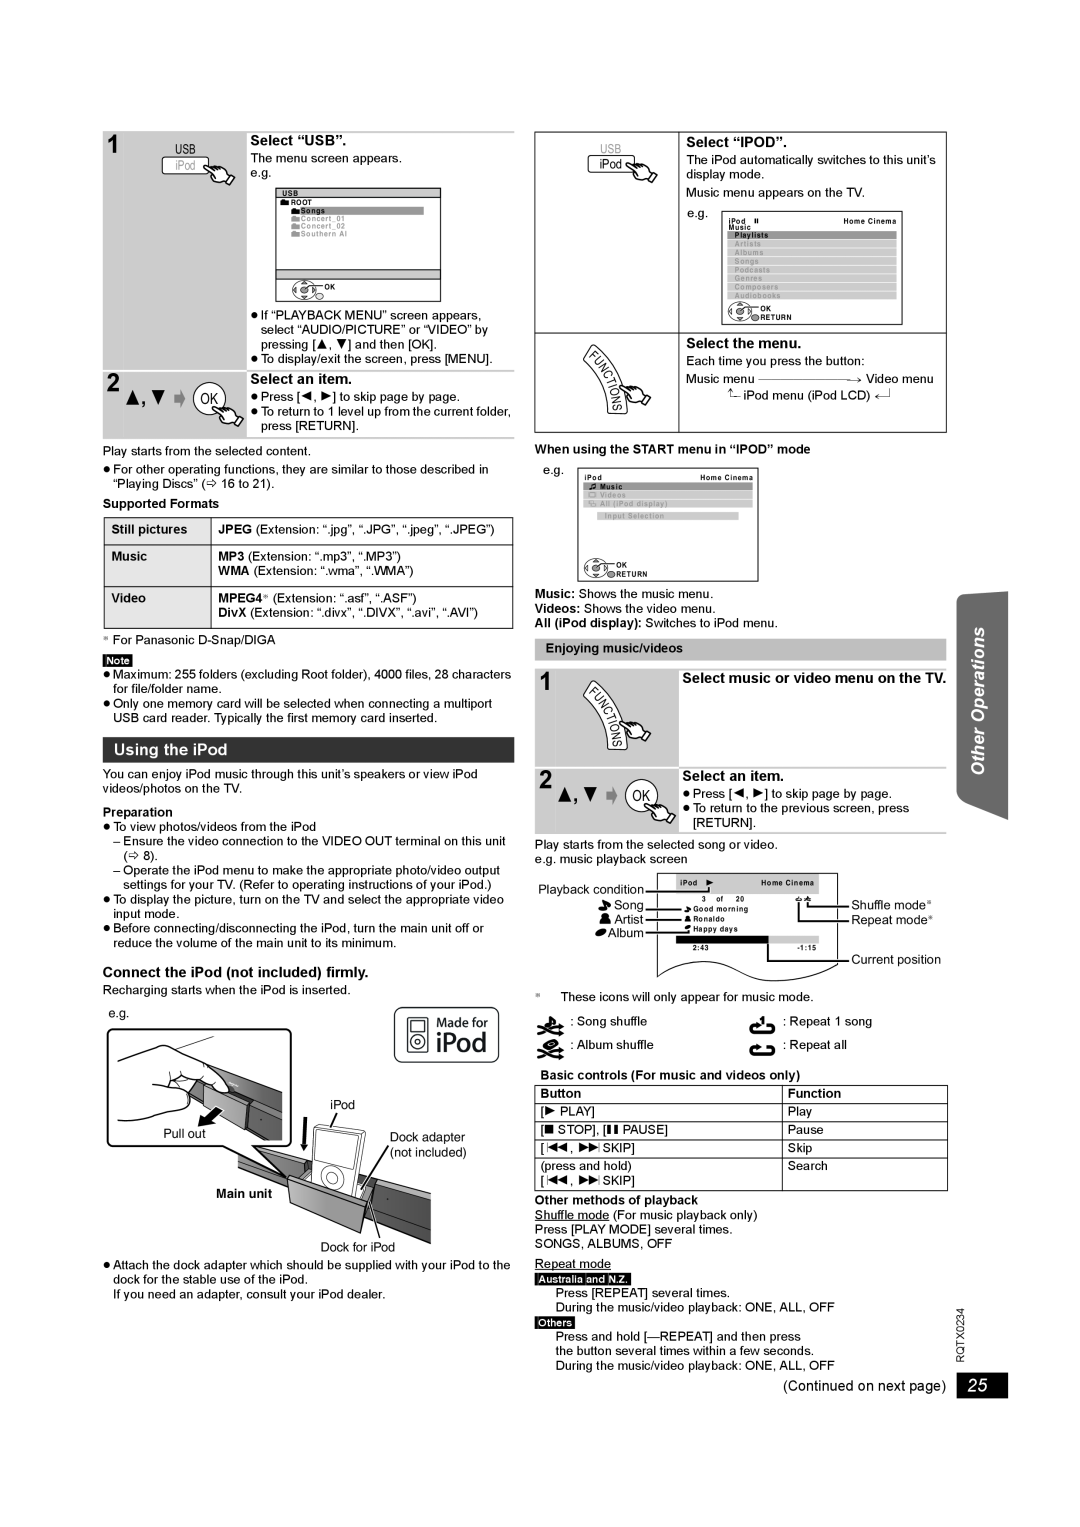 Panasonic SC-PT875 operating instructions Using the iPod, Select “USB”, Started, The menu screen appears, Main unit 